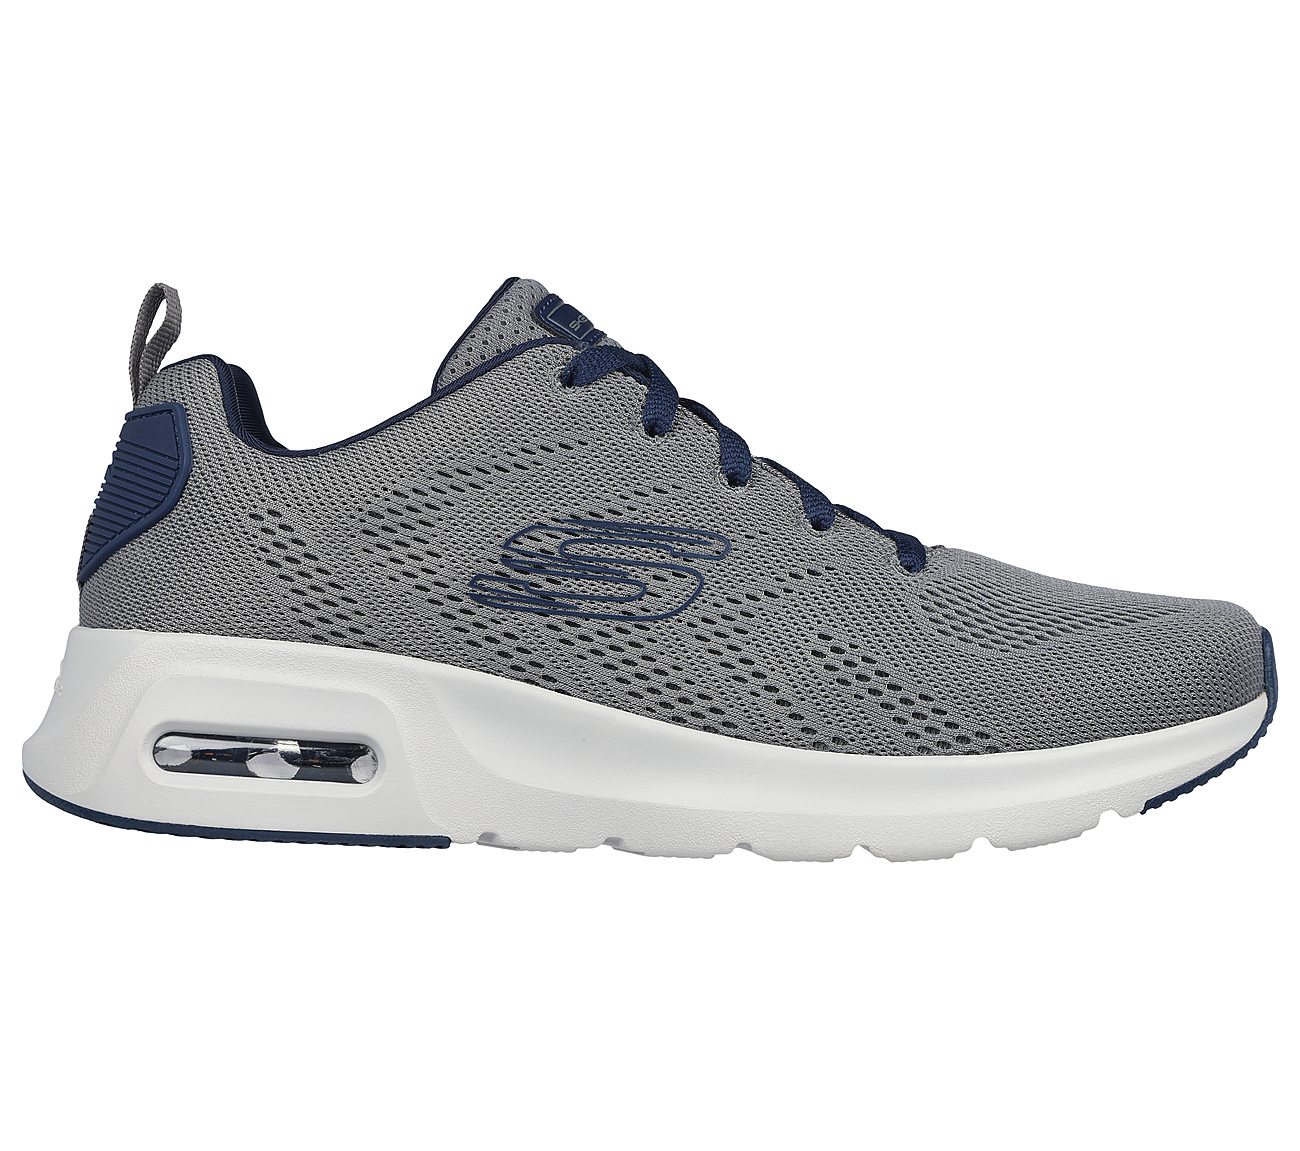 SKECH-AIR COURT, GREY/NAVY Footwear Lateral View